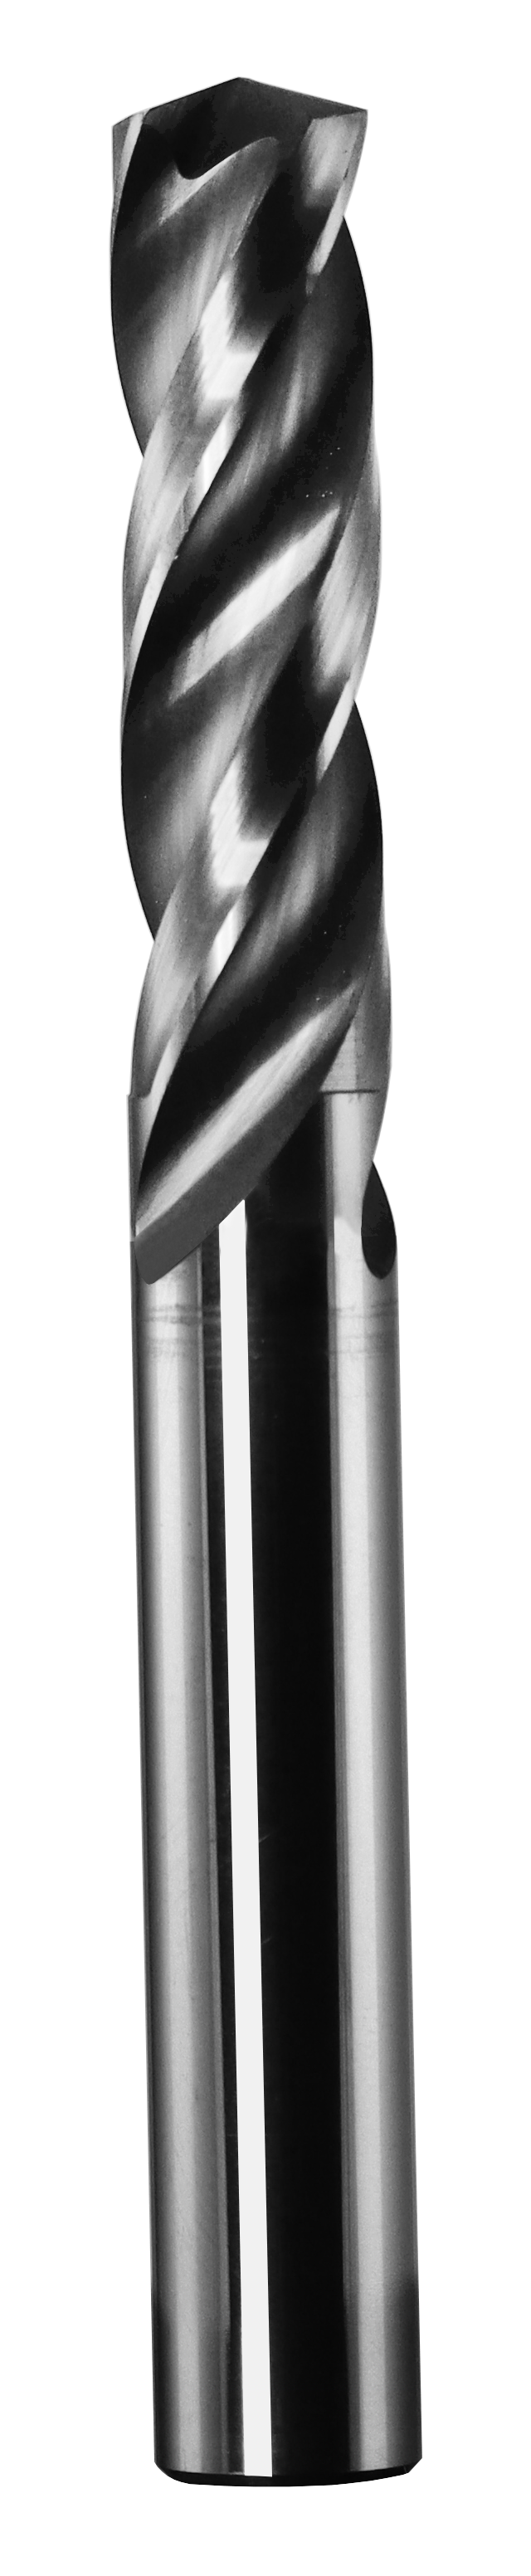 3.70mm Dia, 150 Degree Point, Solid Carbide Drill - 63003